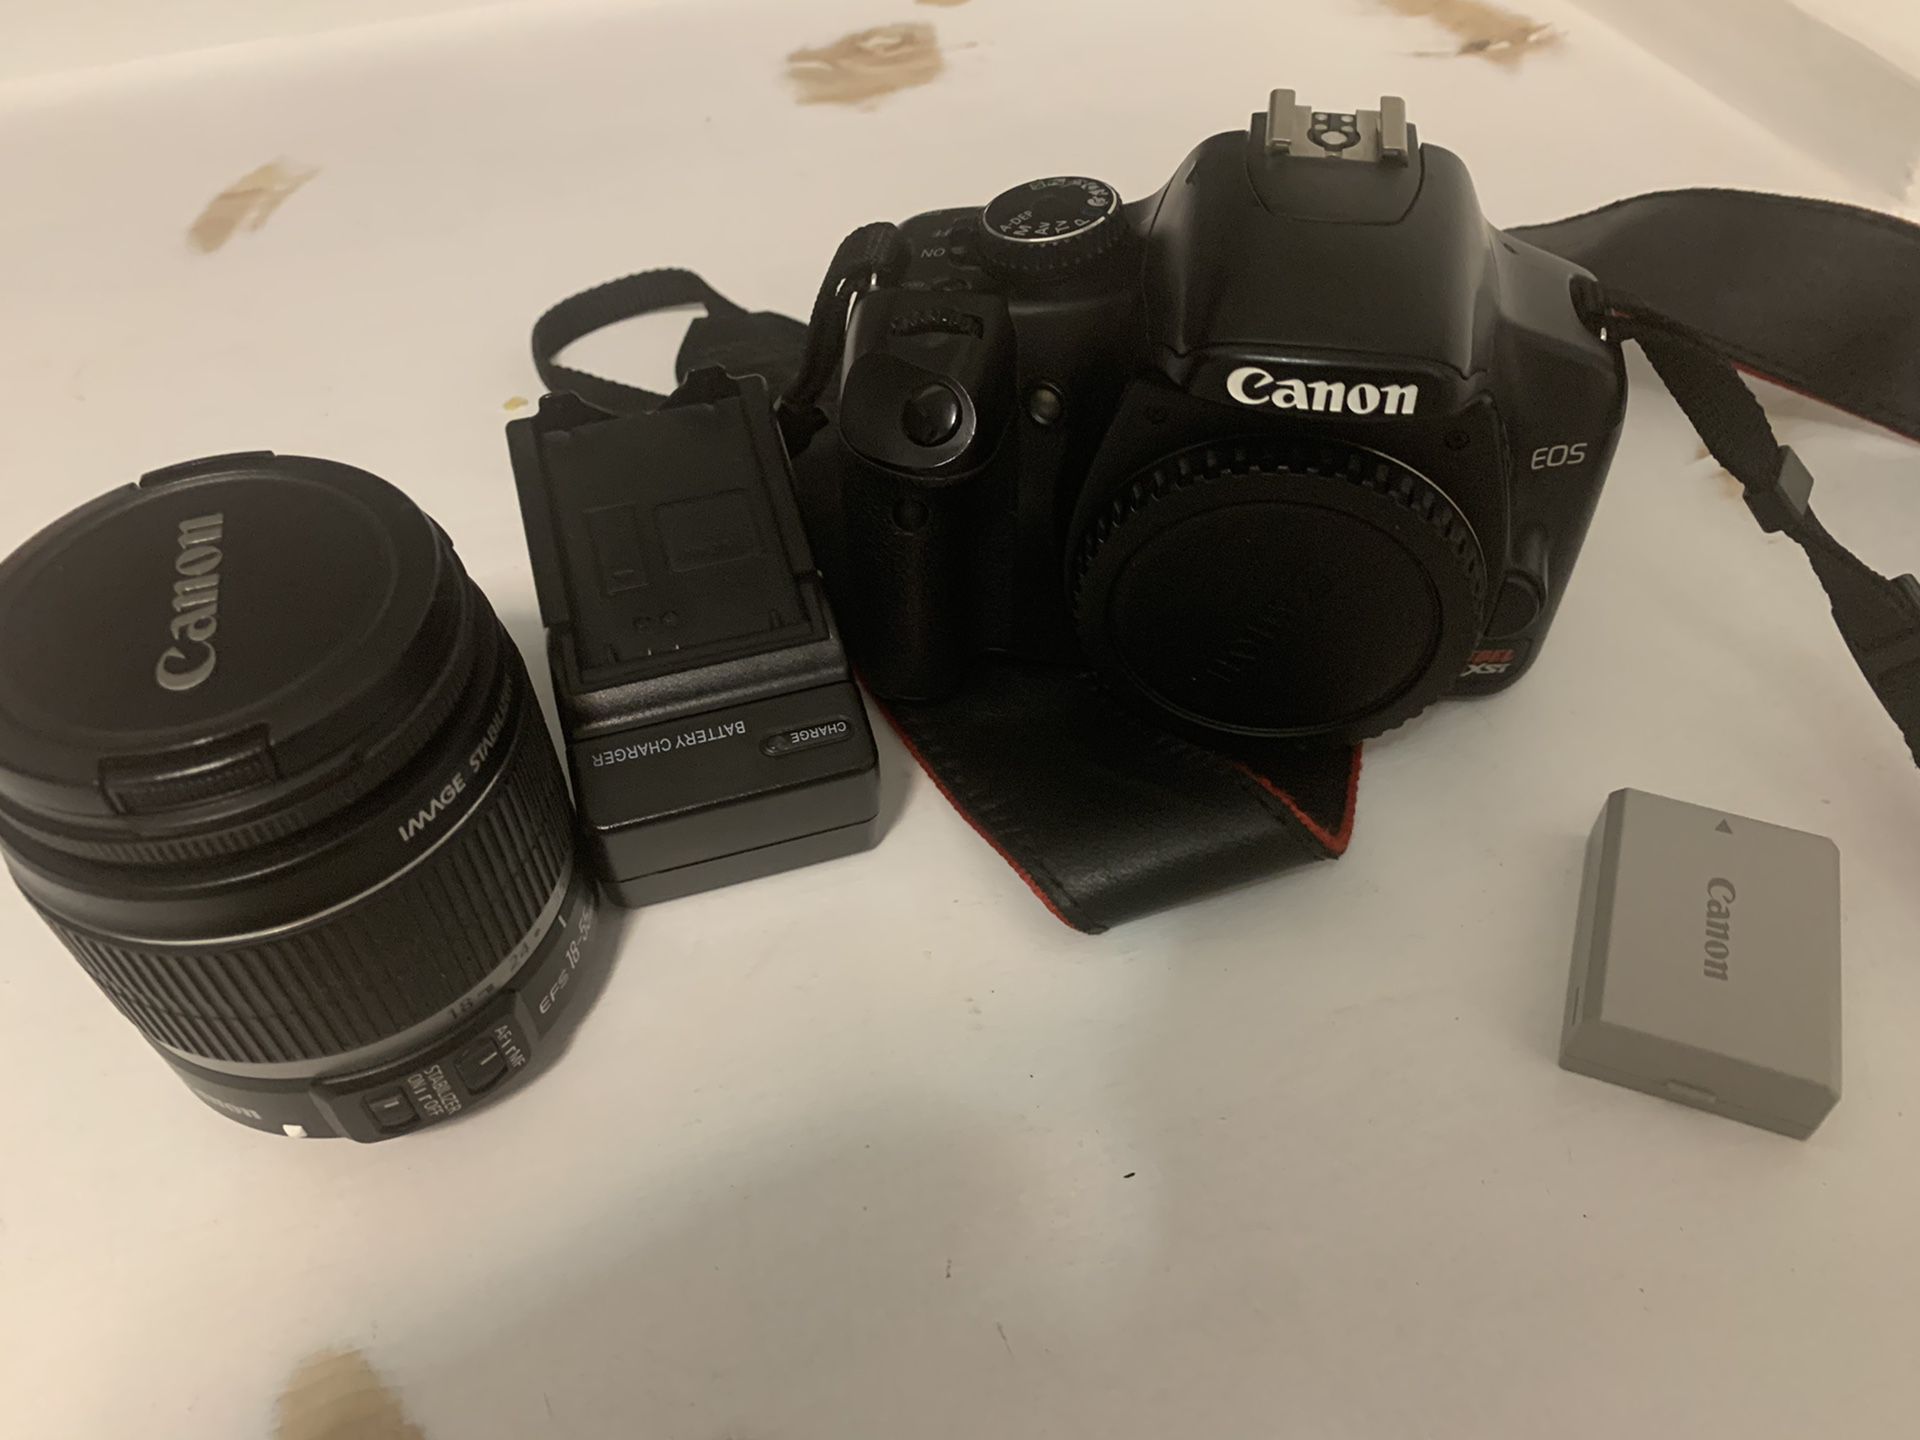 Canon xsi rebel eos and 18-55mm image stabilizer lens